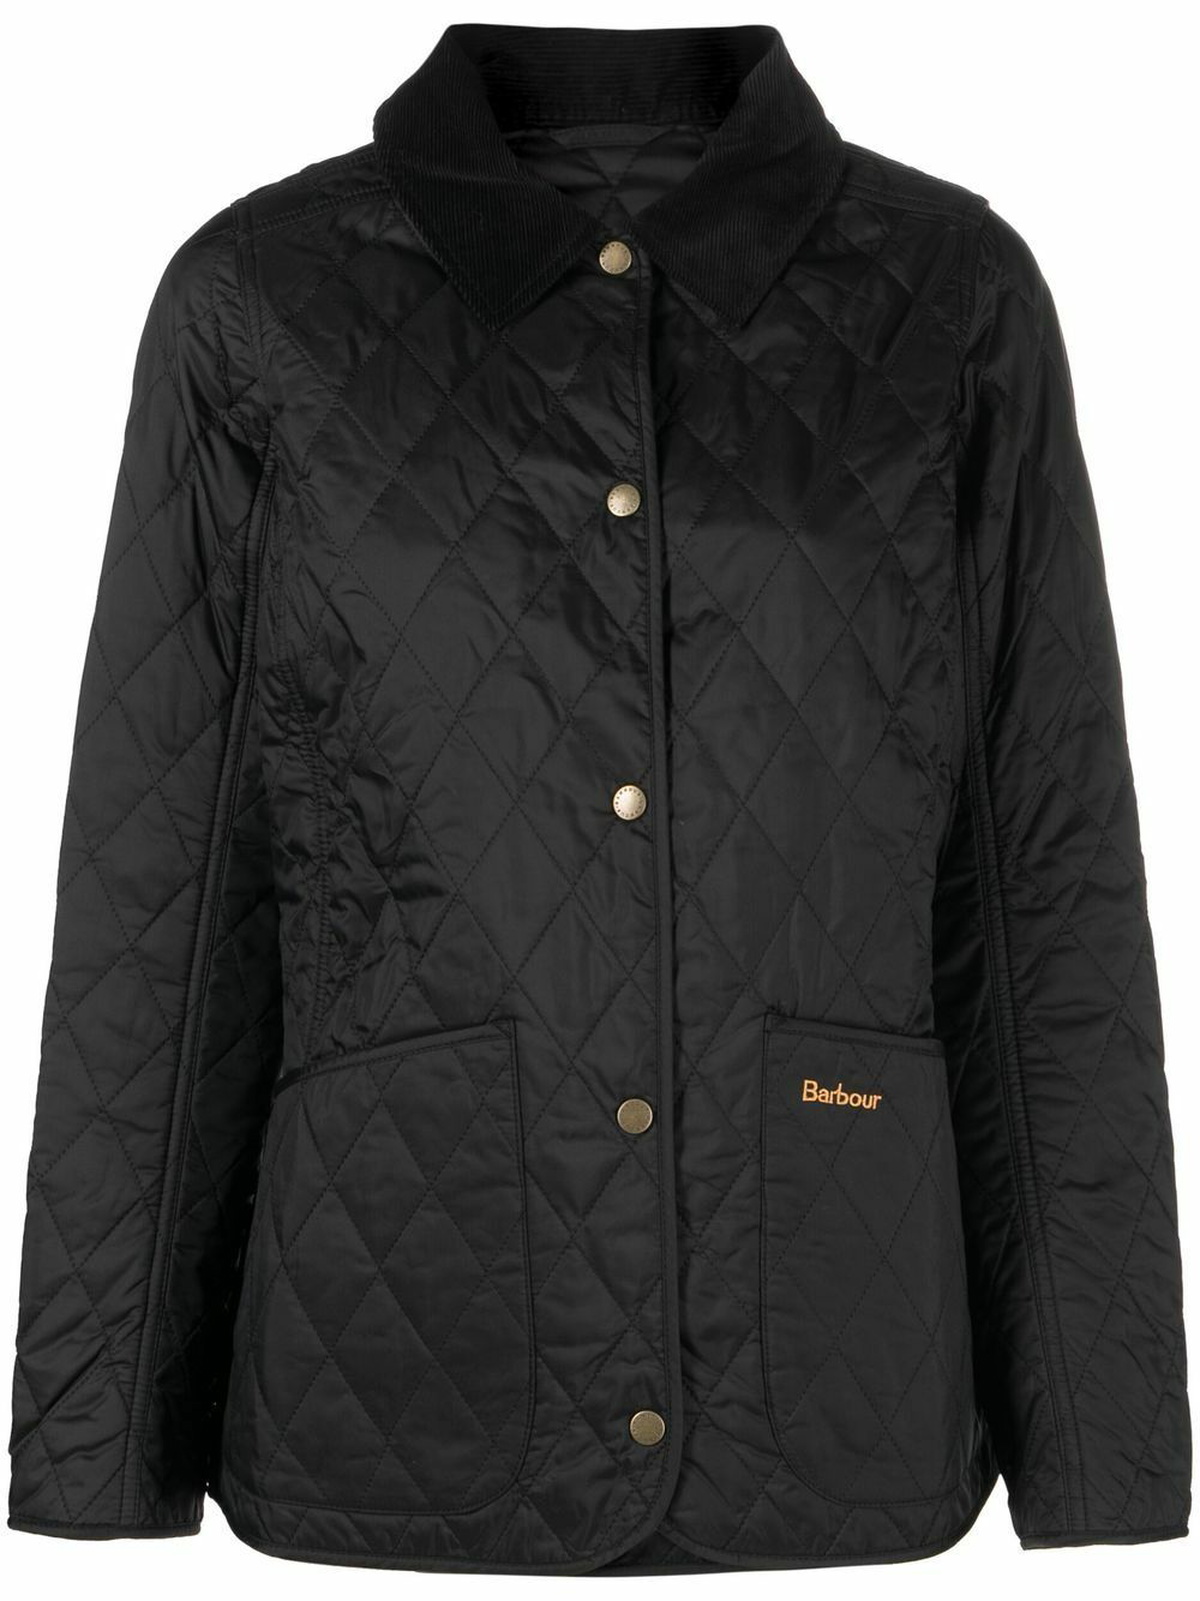 BARBOUR - Annandale Quilted Jacket Barbour